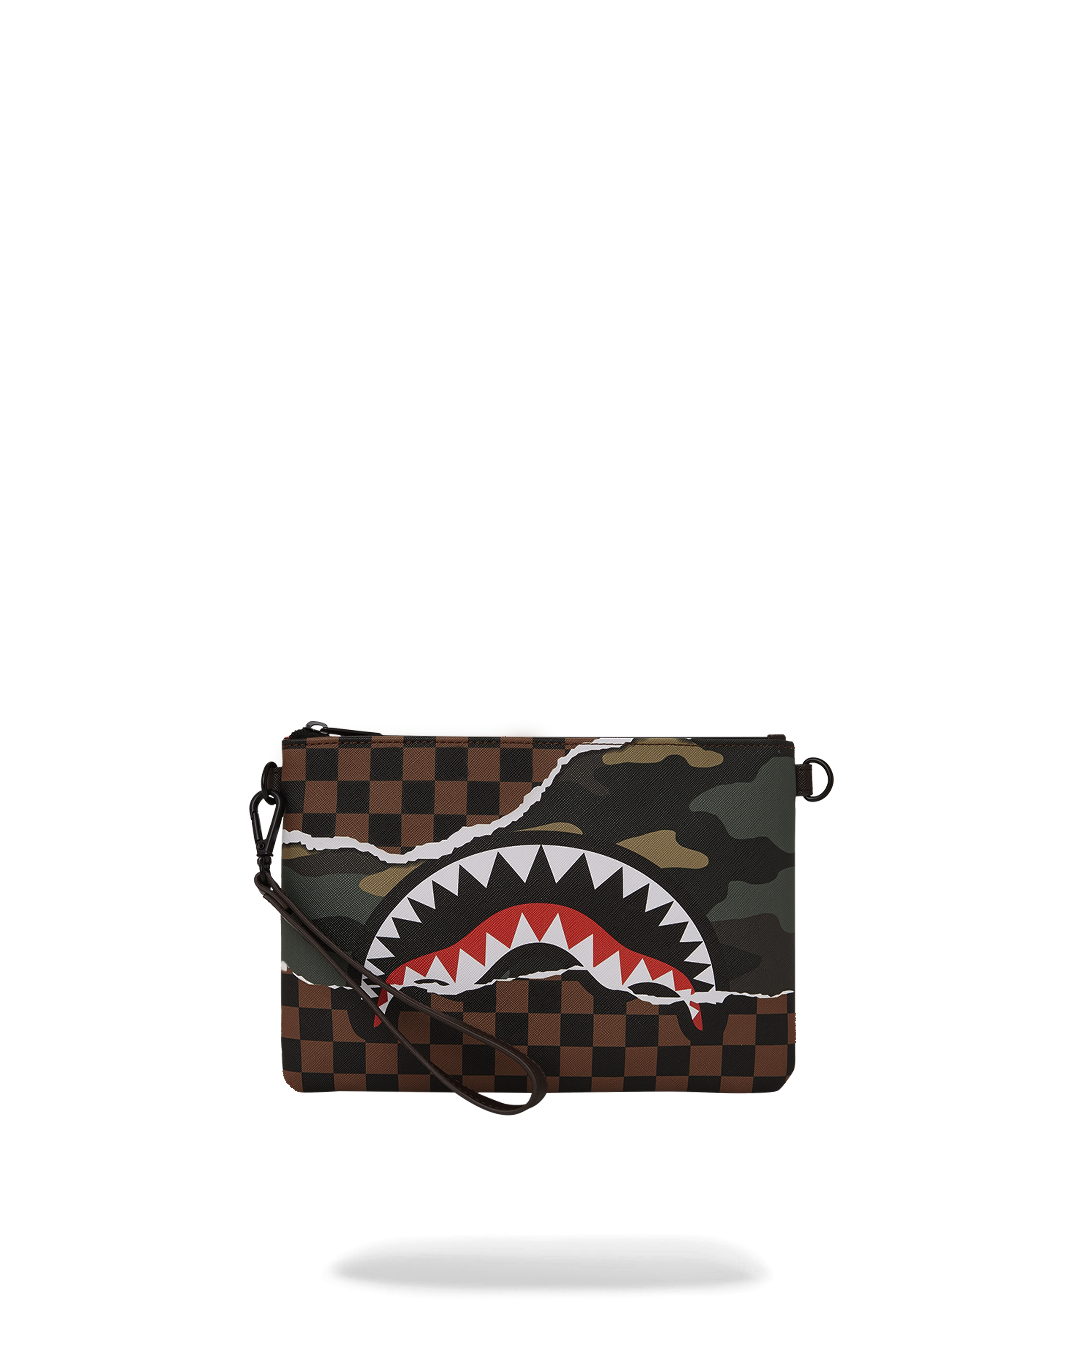 TEAR IT UP CAMO CROSSOVER CLUTCH